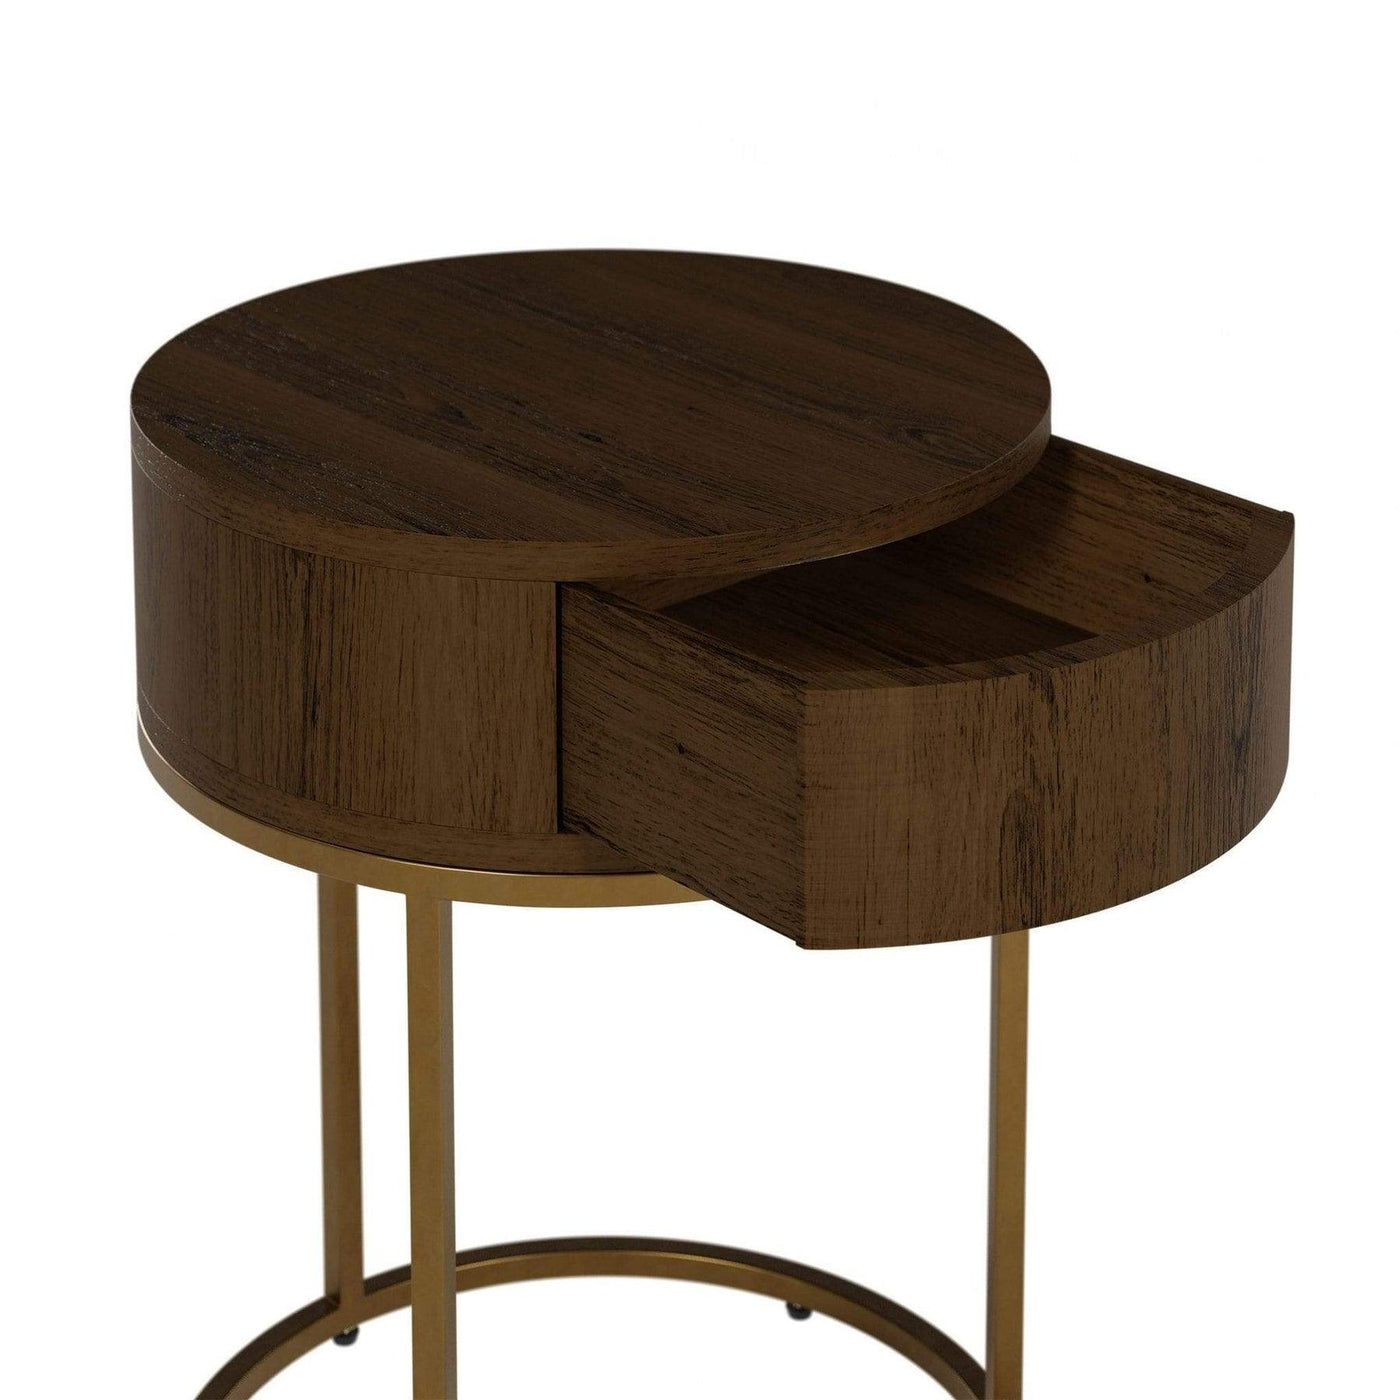 Hampton Round Wooden Bedside - Brown by DI Designs-Esme Furnishings